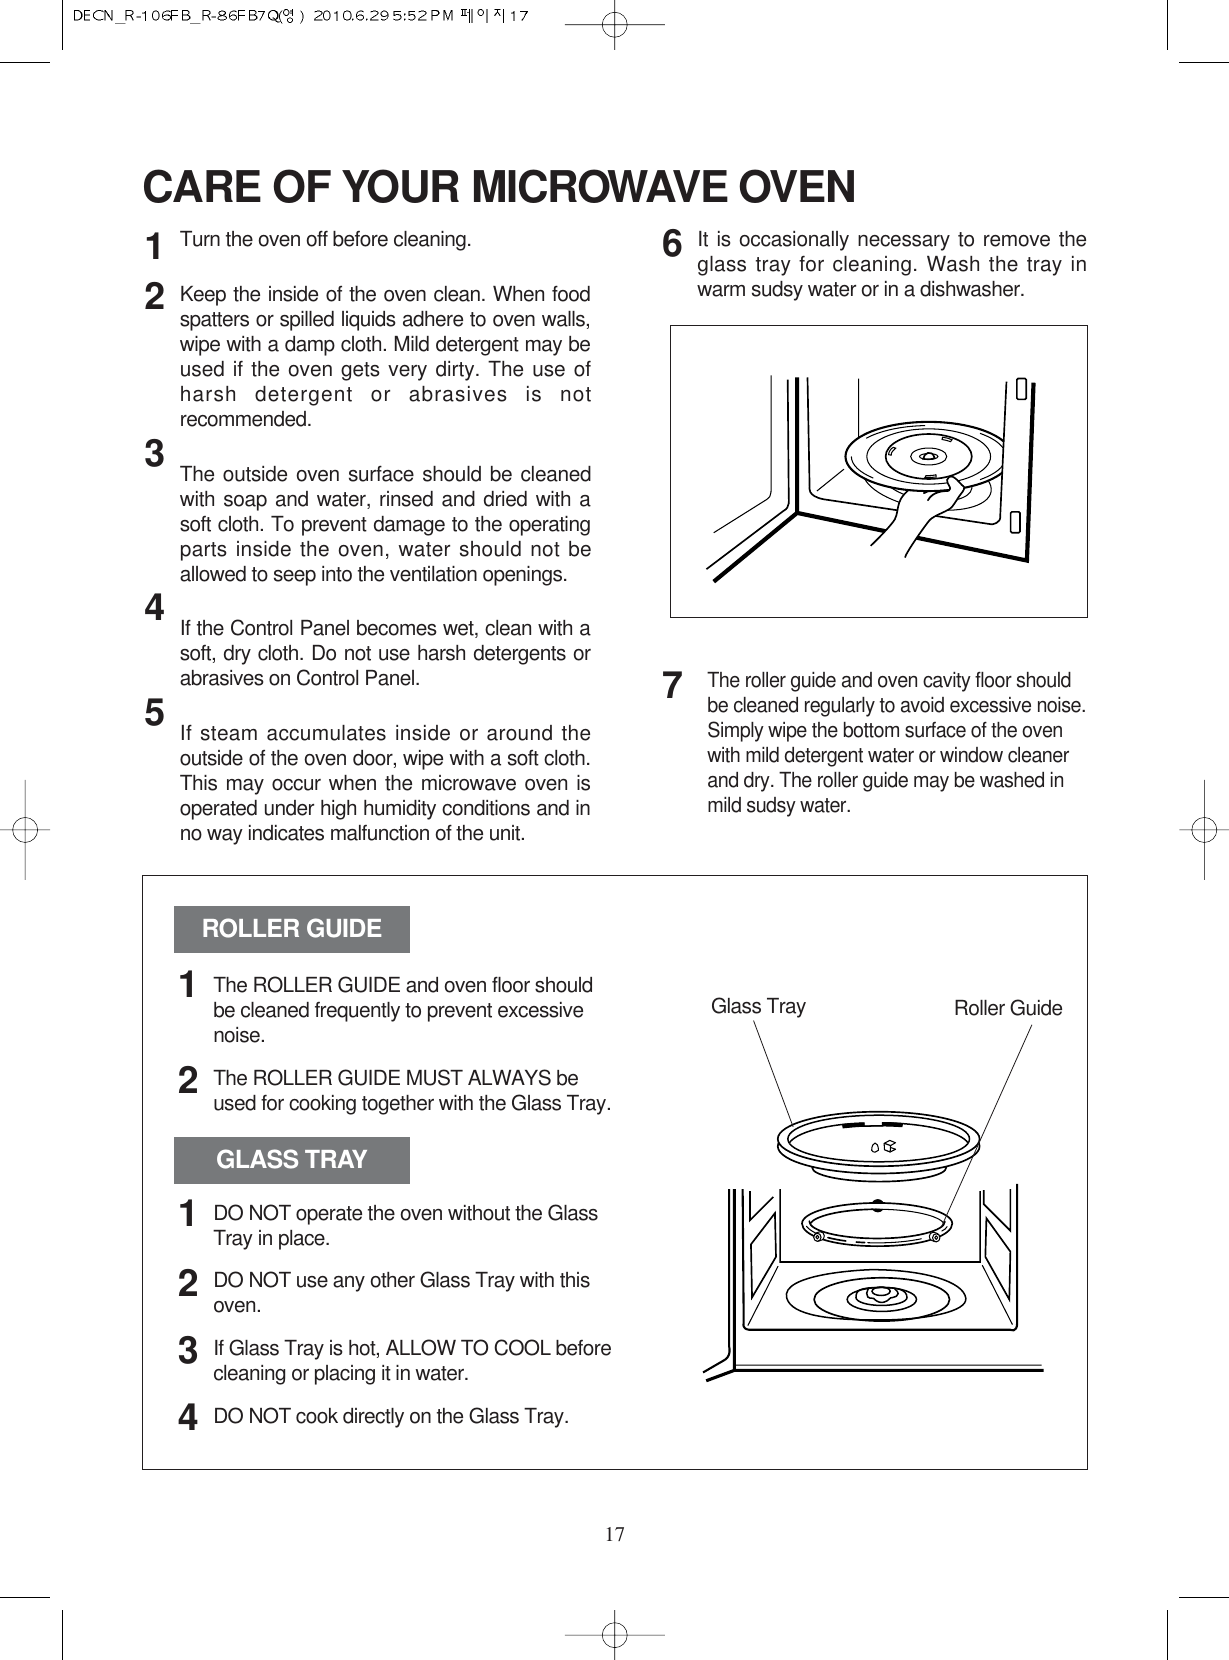 17CARE OF YOUR MICROWAVE OVENTurn the oven off before cleaning.Keep the inside of the oven clean. When foodspatters or spilled liquids adhere to oven walls,wipe with a damp cloth. Mild detergent may beused if the oven gets very dirty. The use ofharsh detergent or abrasives is notrecommended.The outside oven surface should be cleanedwith soap and water, rinsed and dried with asoft cloth. To prevent damage to the operatingparts inside the oven, water should not beallowed to seep into the ventilation openings.If the Control Panel becomes wet, clean with asoft, dry cloth. Do not use harsh detergents orabrasives on Control Panel.If steam accumulates inside or around theoutside of the oven door, wipe with a soft cloth.This may occur when the microwave oven isoperated under high humidity conditions and inno way indicates malfunction of the unit.It is occasionally necessary to remove theglass tray for cleaning. Wash the tray inwarm sudsy water or in a dishwasher.1234567The roller guide and oven cavity floor shouldbe cleaned regularly to avoid excessive noise. Simply wipe the bottom surface of the ovenwith mild detergent water or window cleanerand dry. The roller guide may be washed inmild sudsy water.ROLLER GUIDEGLASS TRAYGlass Tray Roller GuideThe ROLLER GUIDE and oven floor shouldbe cleaned frequently to prevent excessivenoise.The ROLLER GUIDE MUST ALWAYS beused for cooking together with the Glass Tray.DO NOT operate the oven without the GlassTray in place.DO NOT use any other Glass Tray with thisoven.If Glass Tray is hot, ALLOW TO COOL beforecleaning or placing it in water.DO NOT cook directly on the Glass Tray.121234